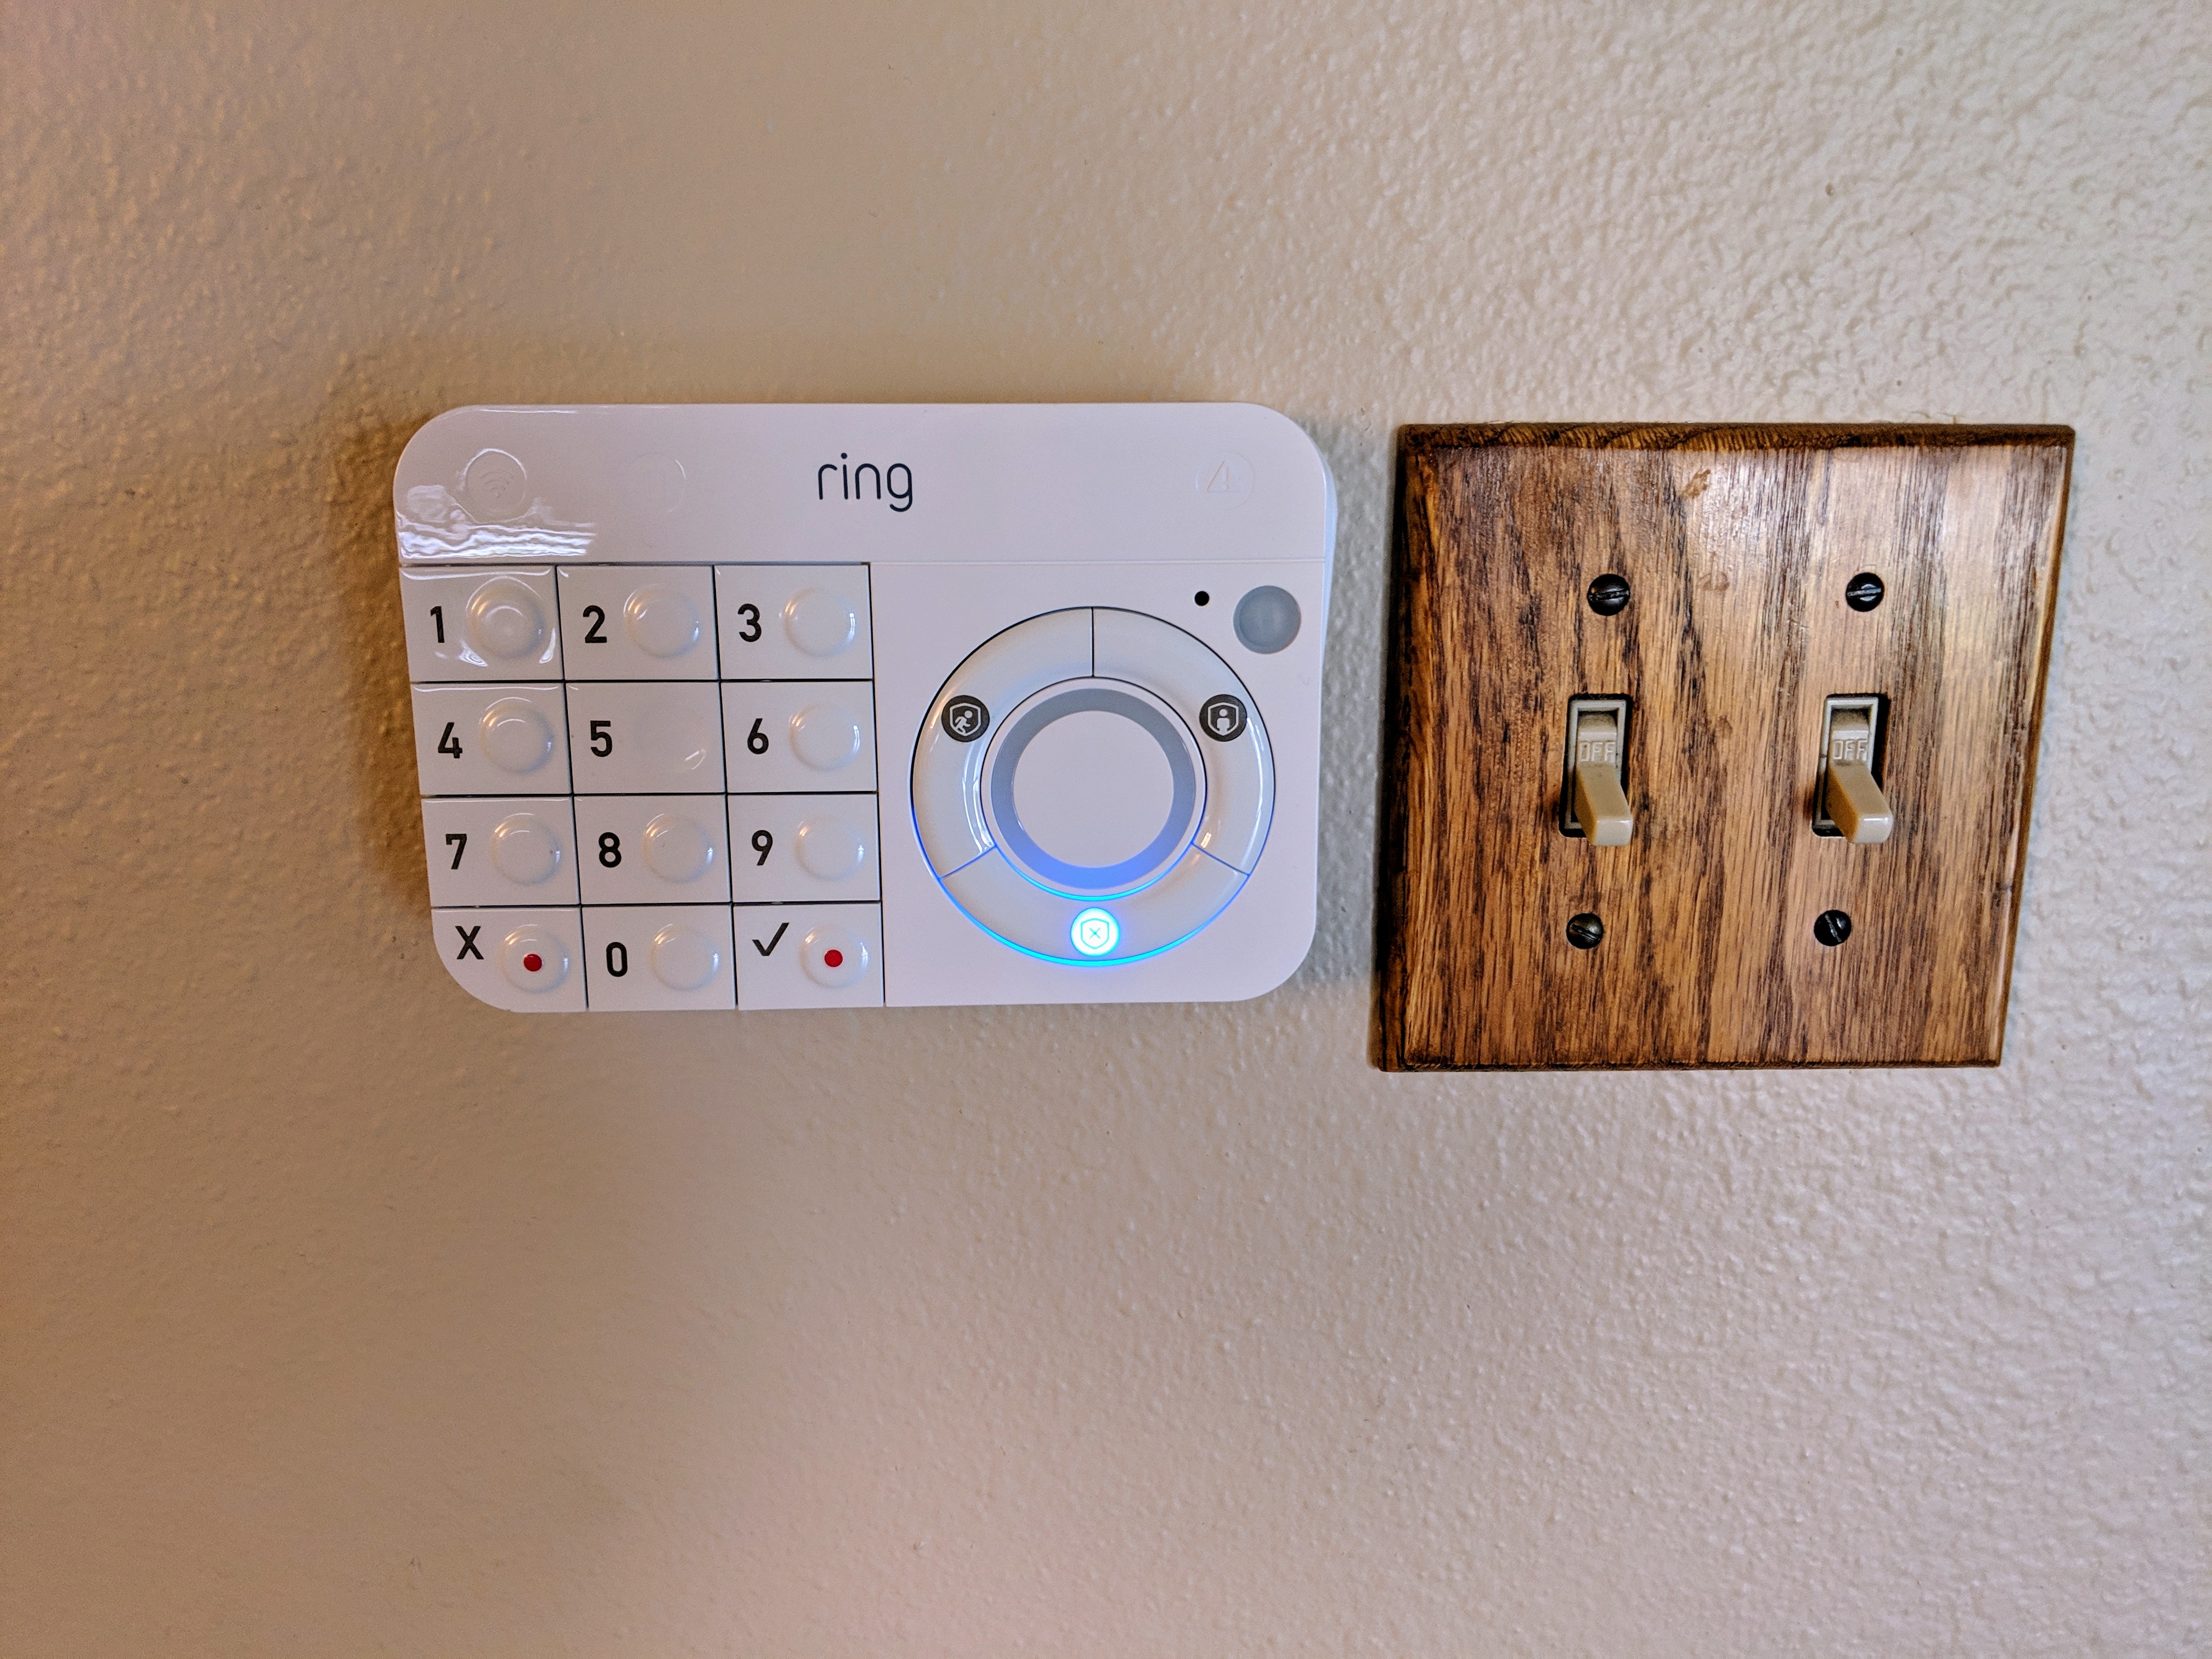 Ring Alarm Security Kit Review: A Low-Cost Yet Reliable DIY System